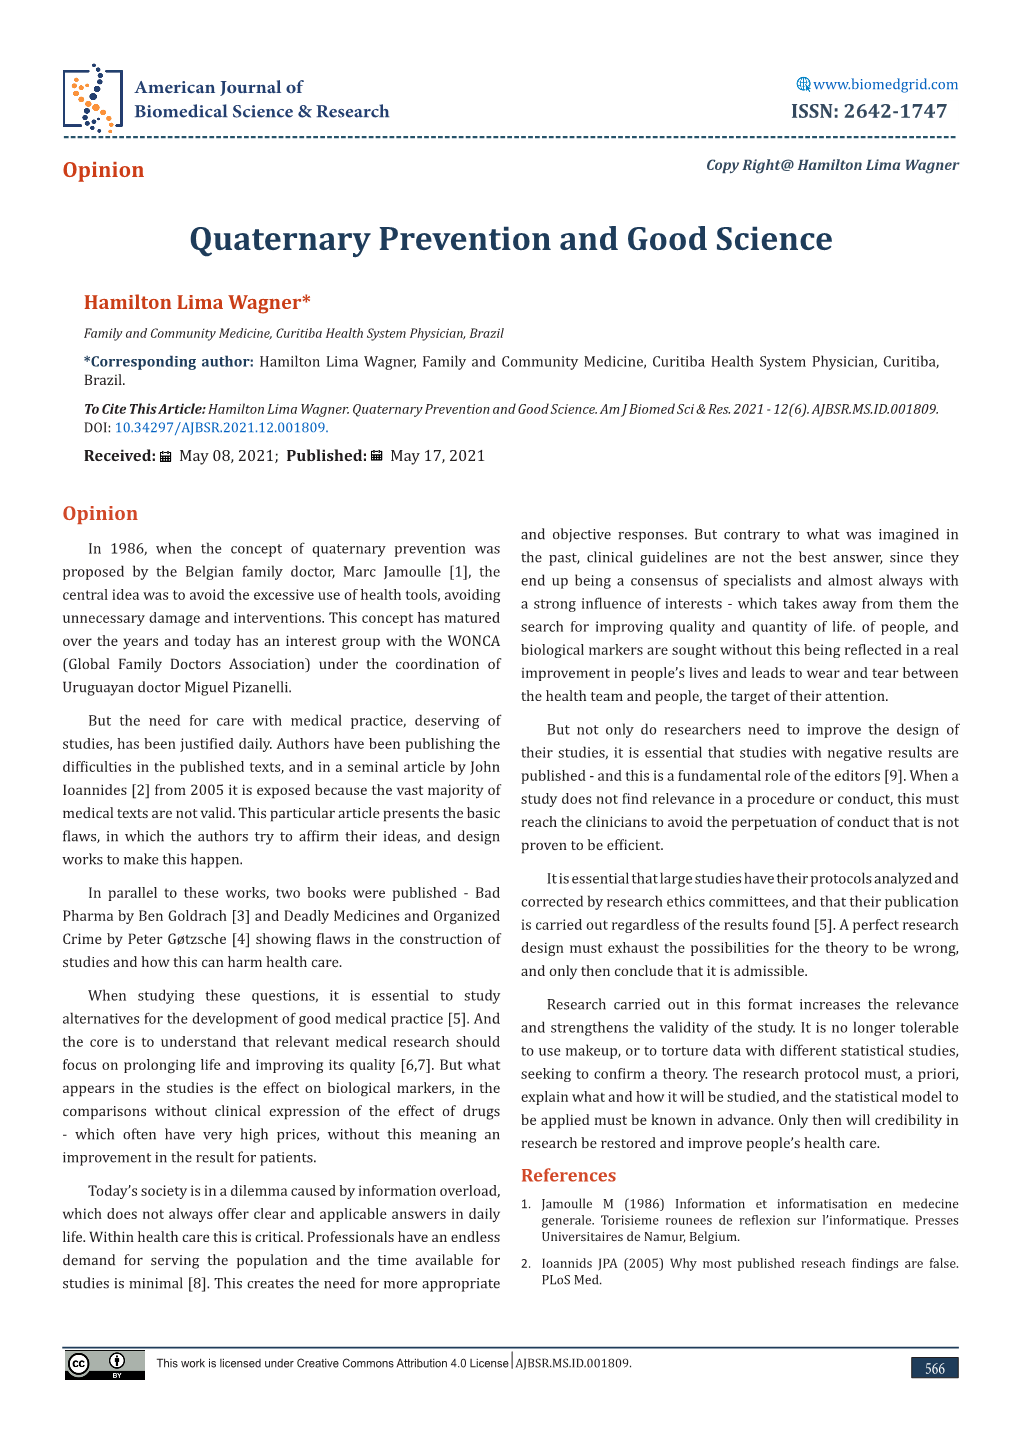 Quaternary Prevention and Good Science